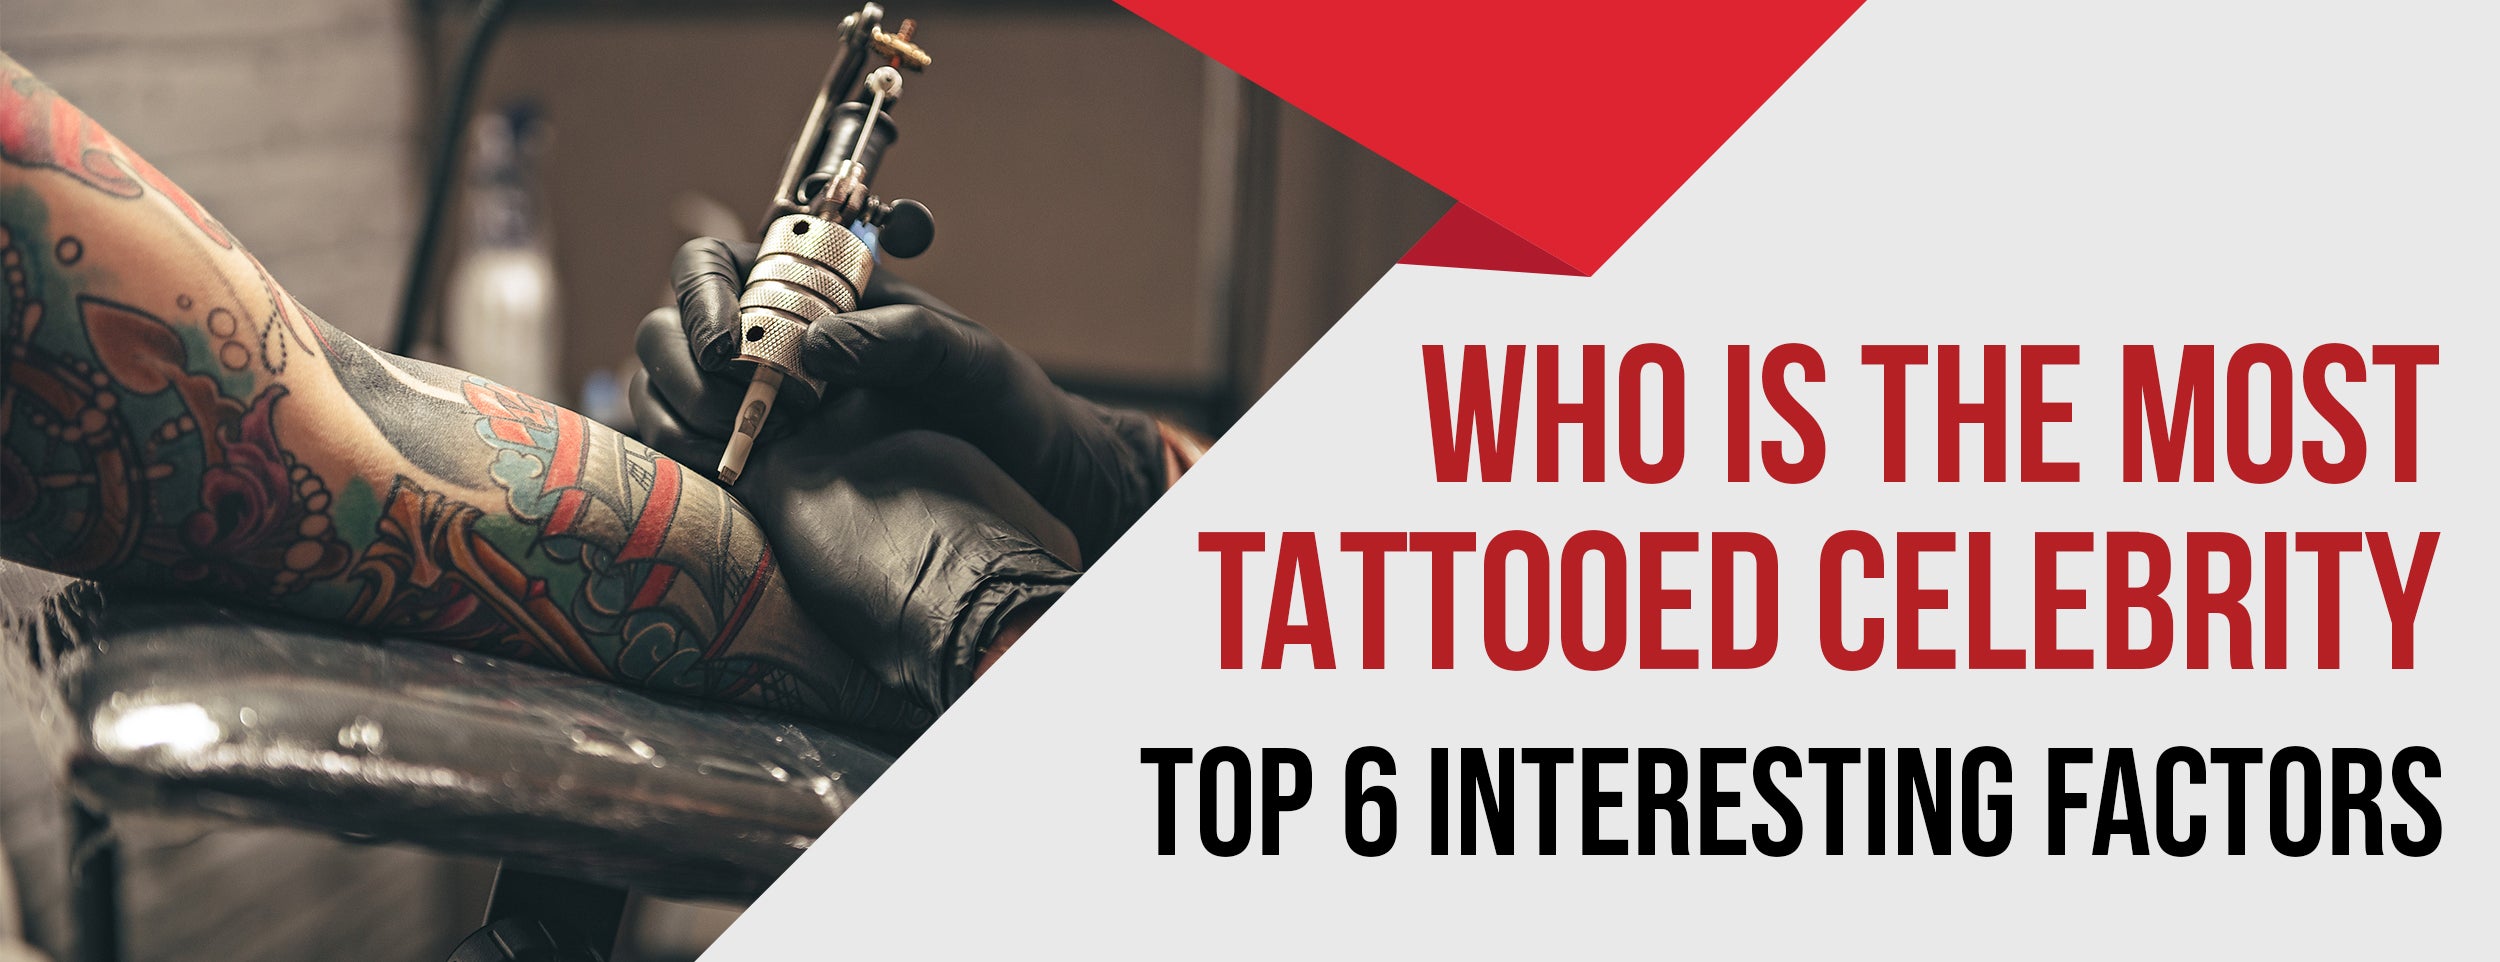 Never use these 6 products on your tattoos - Inked Ritual Tattoo Care -  INKED RITUAL